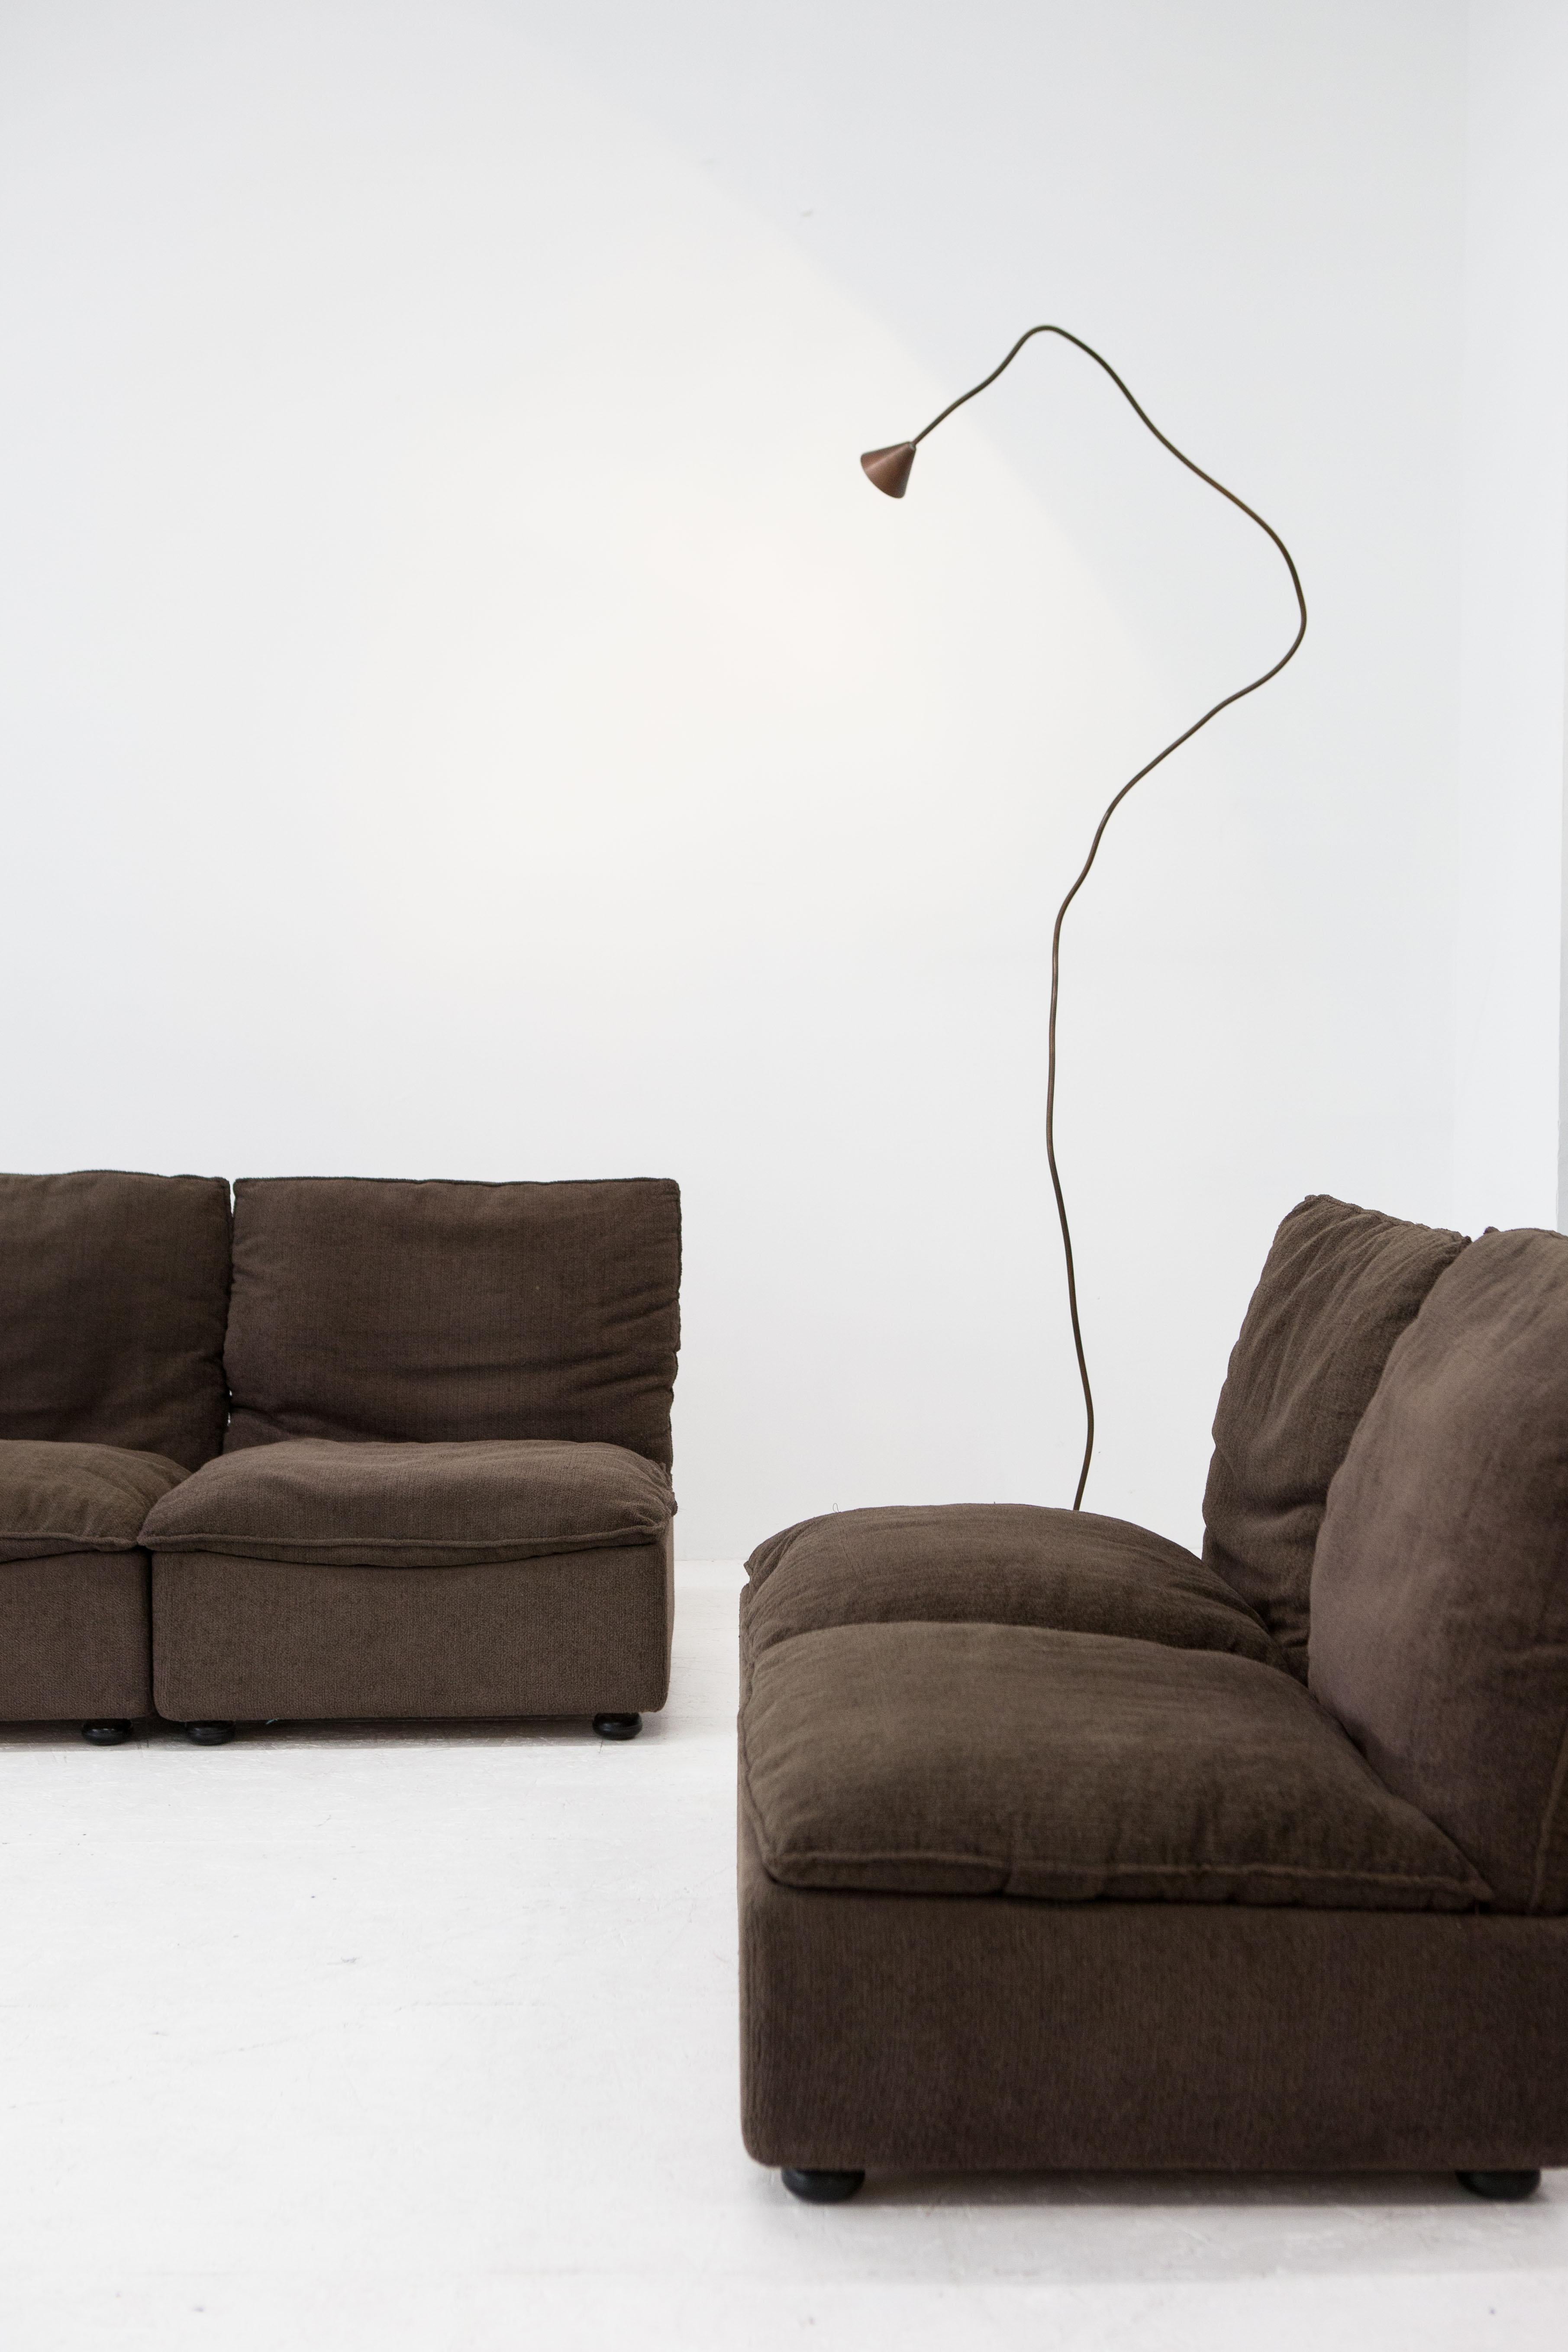 Aldo Davico’s modular sofa is unique in its design because apart from the various elements, neither its cushions are fixed and thus remain modular. They can be attached to their seats and backrests by convenient straps. 

In its dimensions and